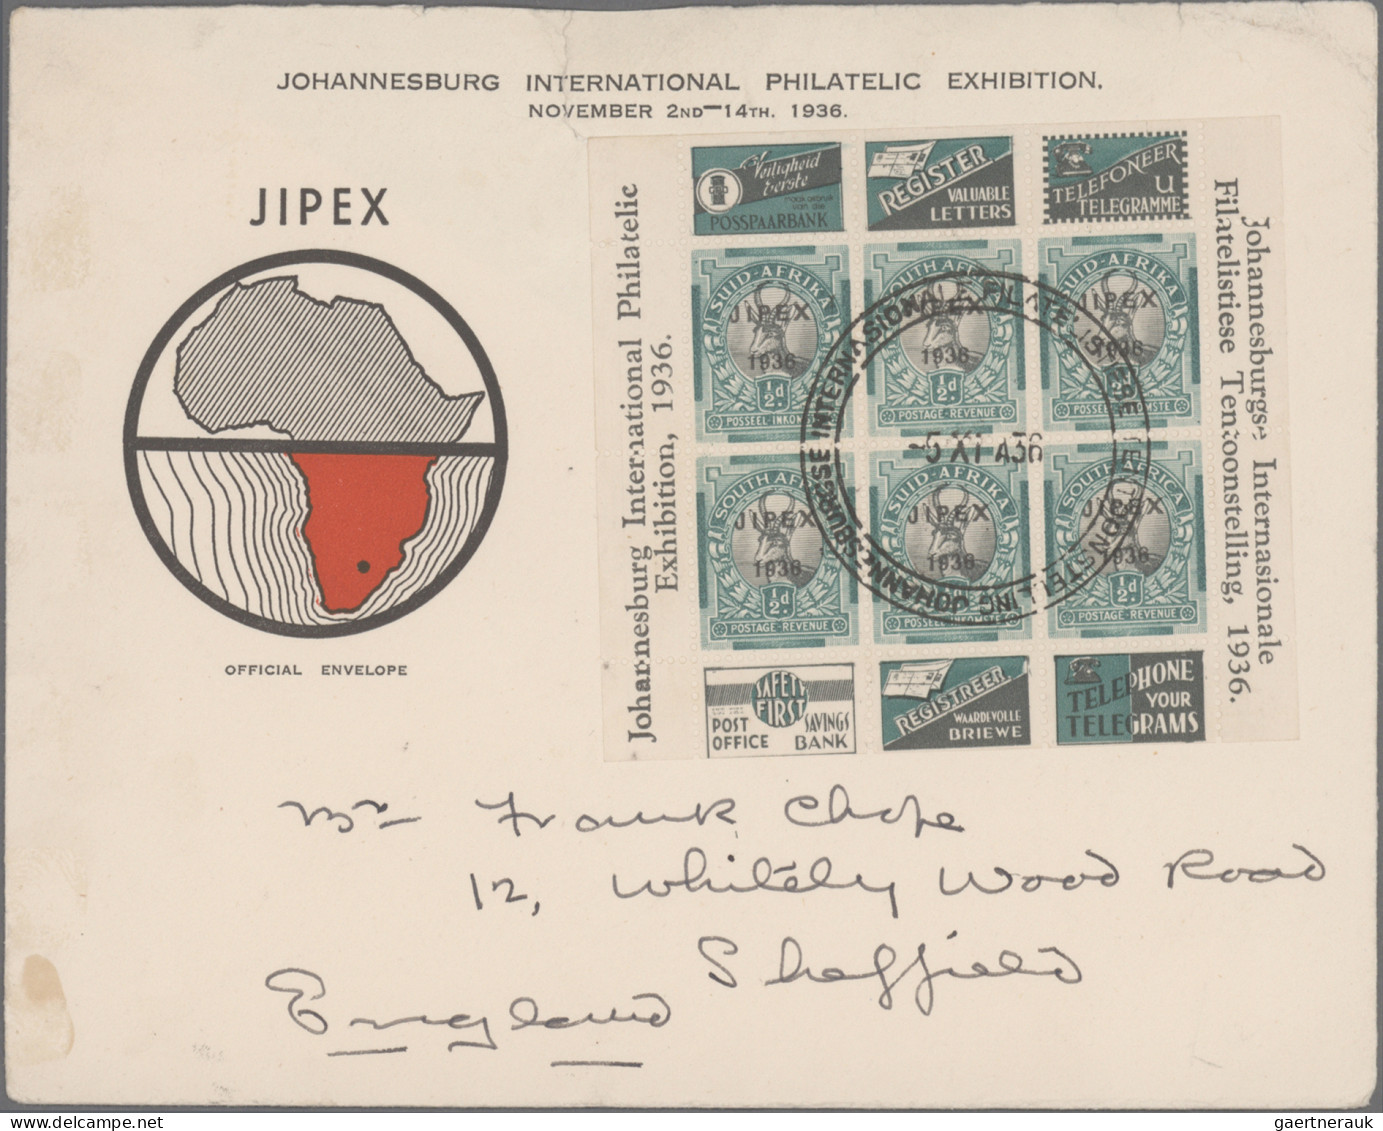 South Africa: 1840/1965 (ca.), balance of apprx. 138 covers/cards/few fronts, ma